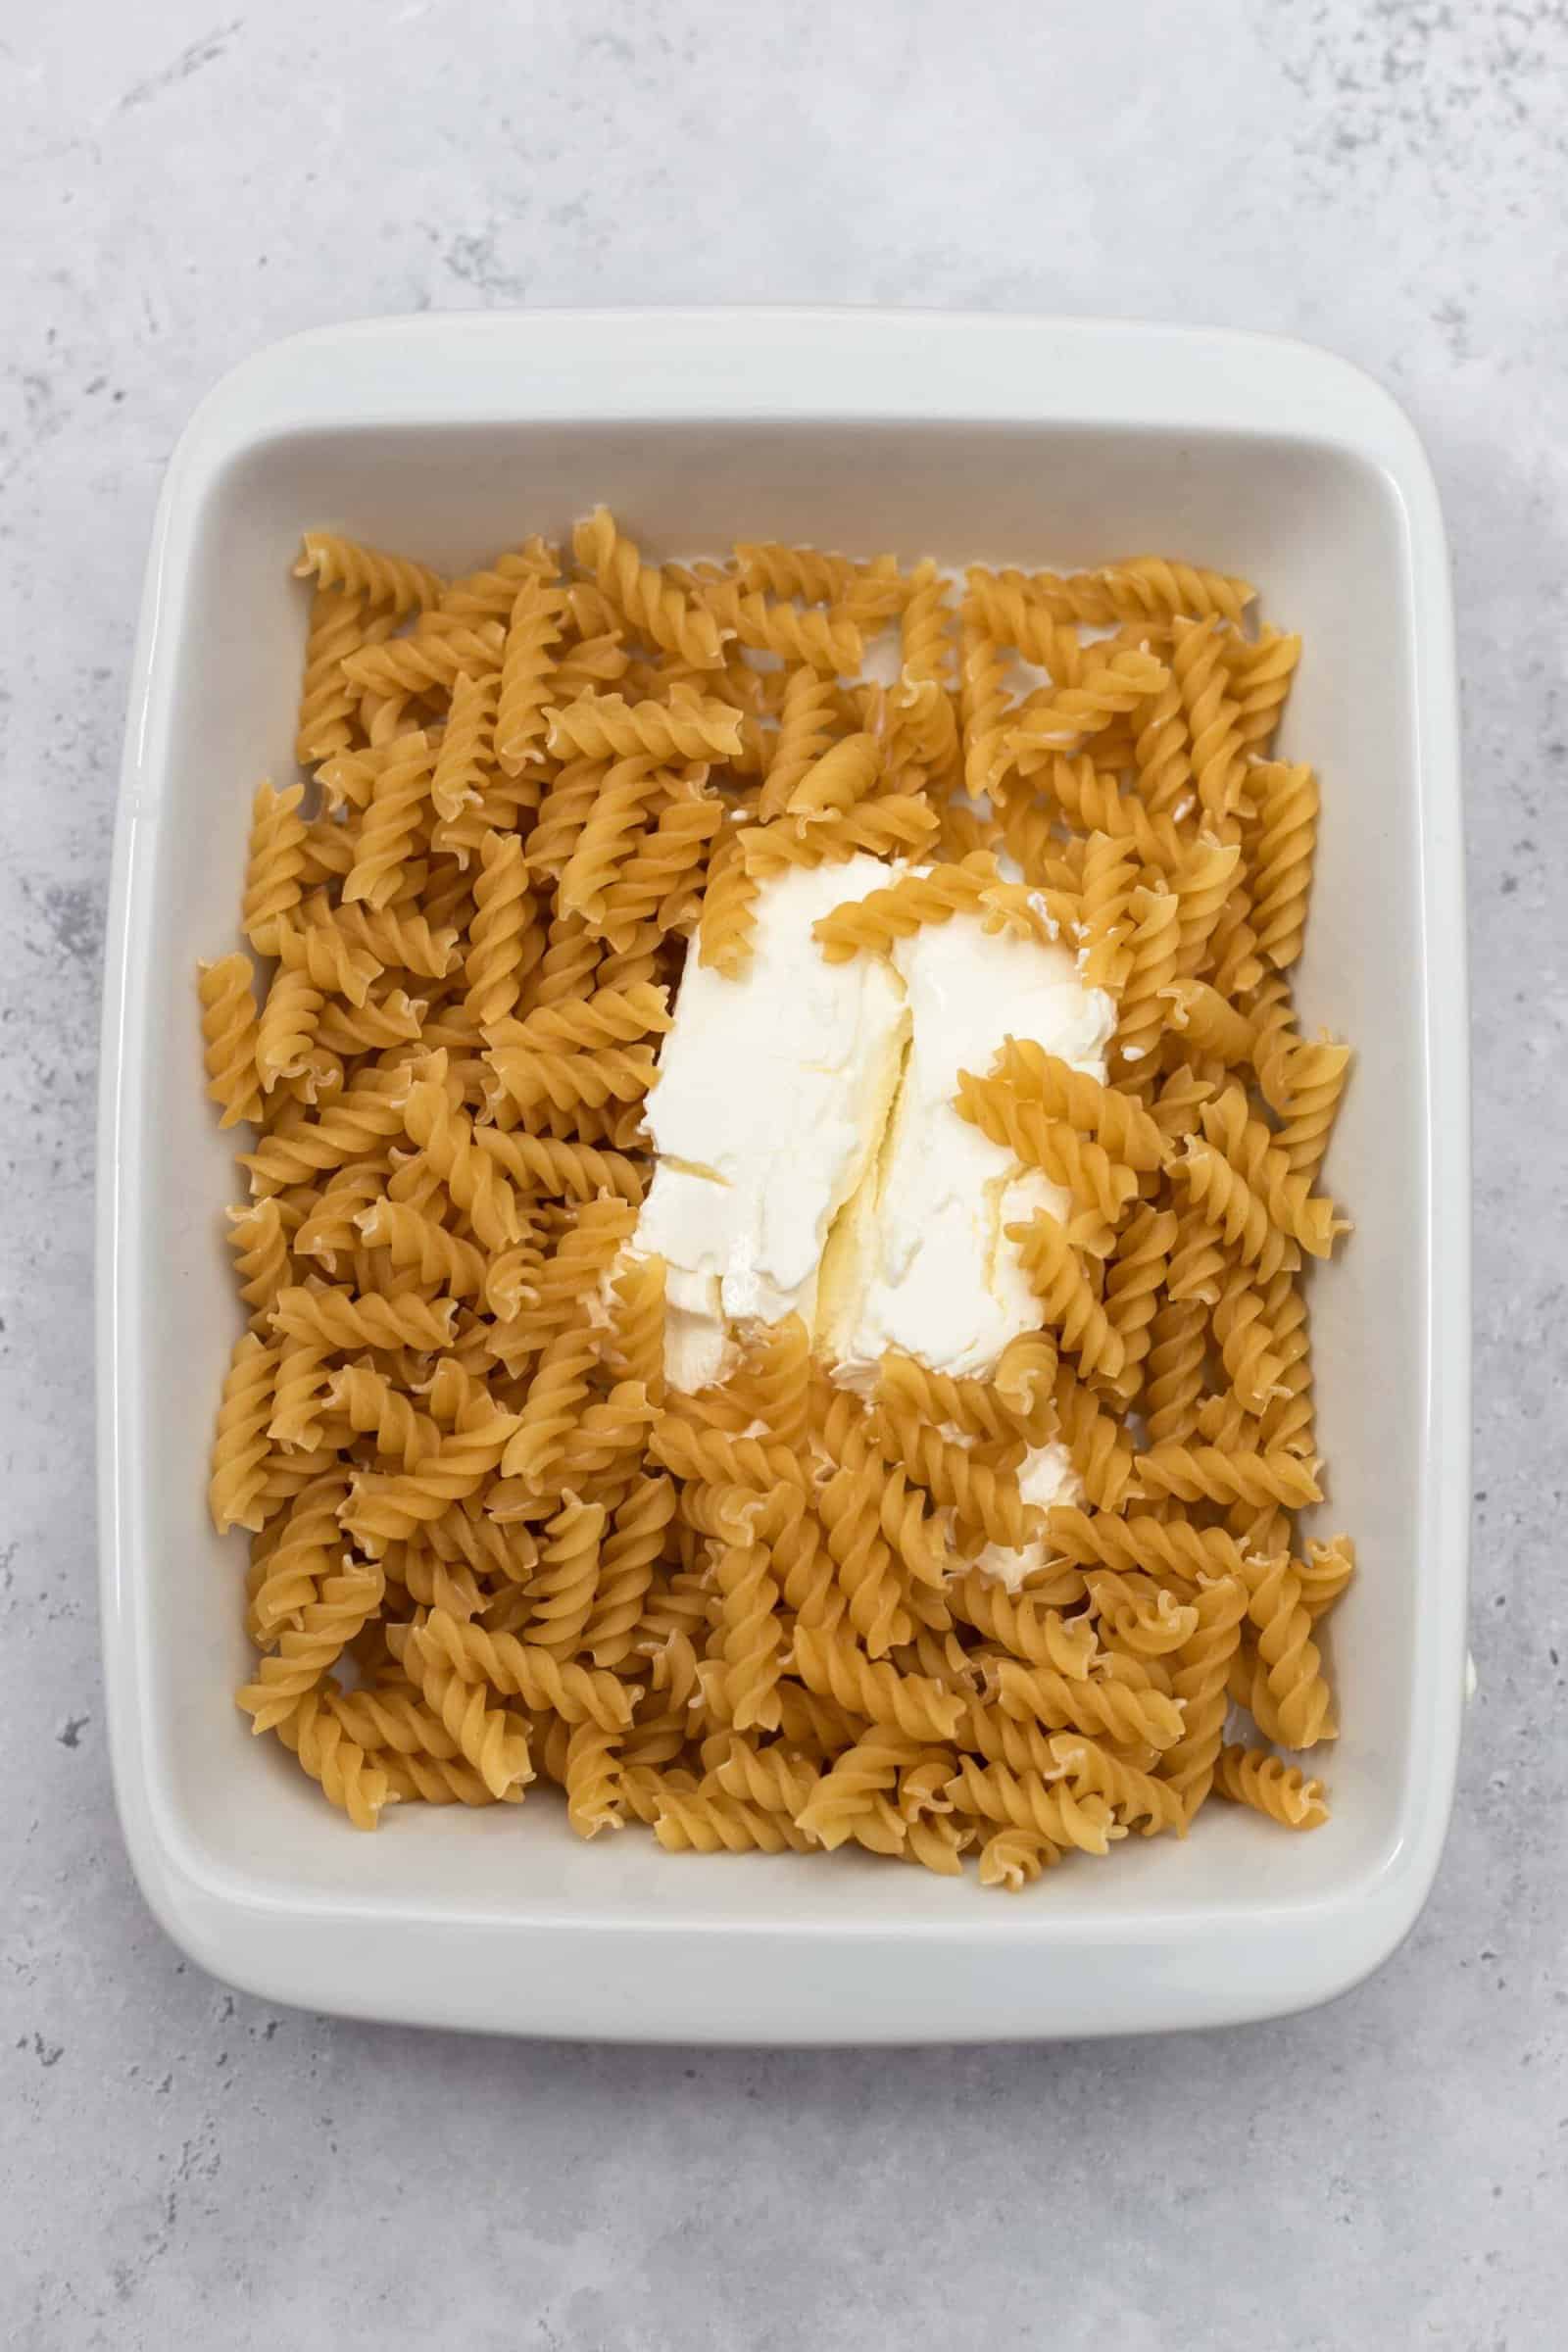 a block of cream cheese in the center of a baking dish surrounded by raw corkscrew pasta